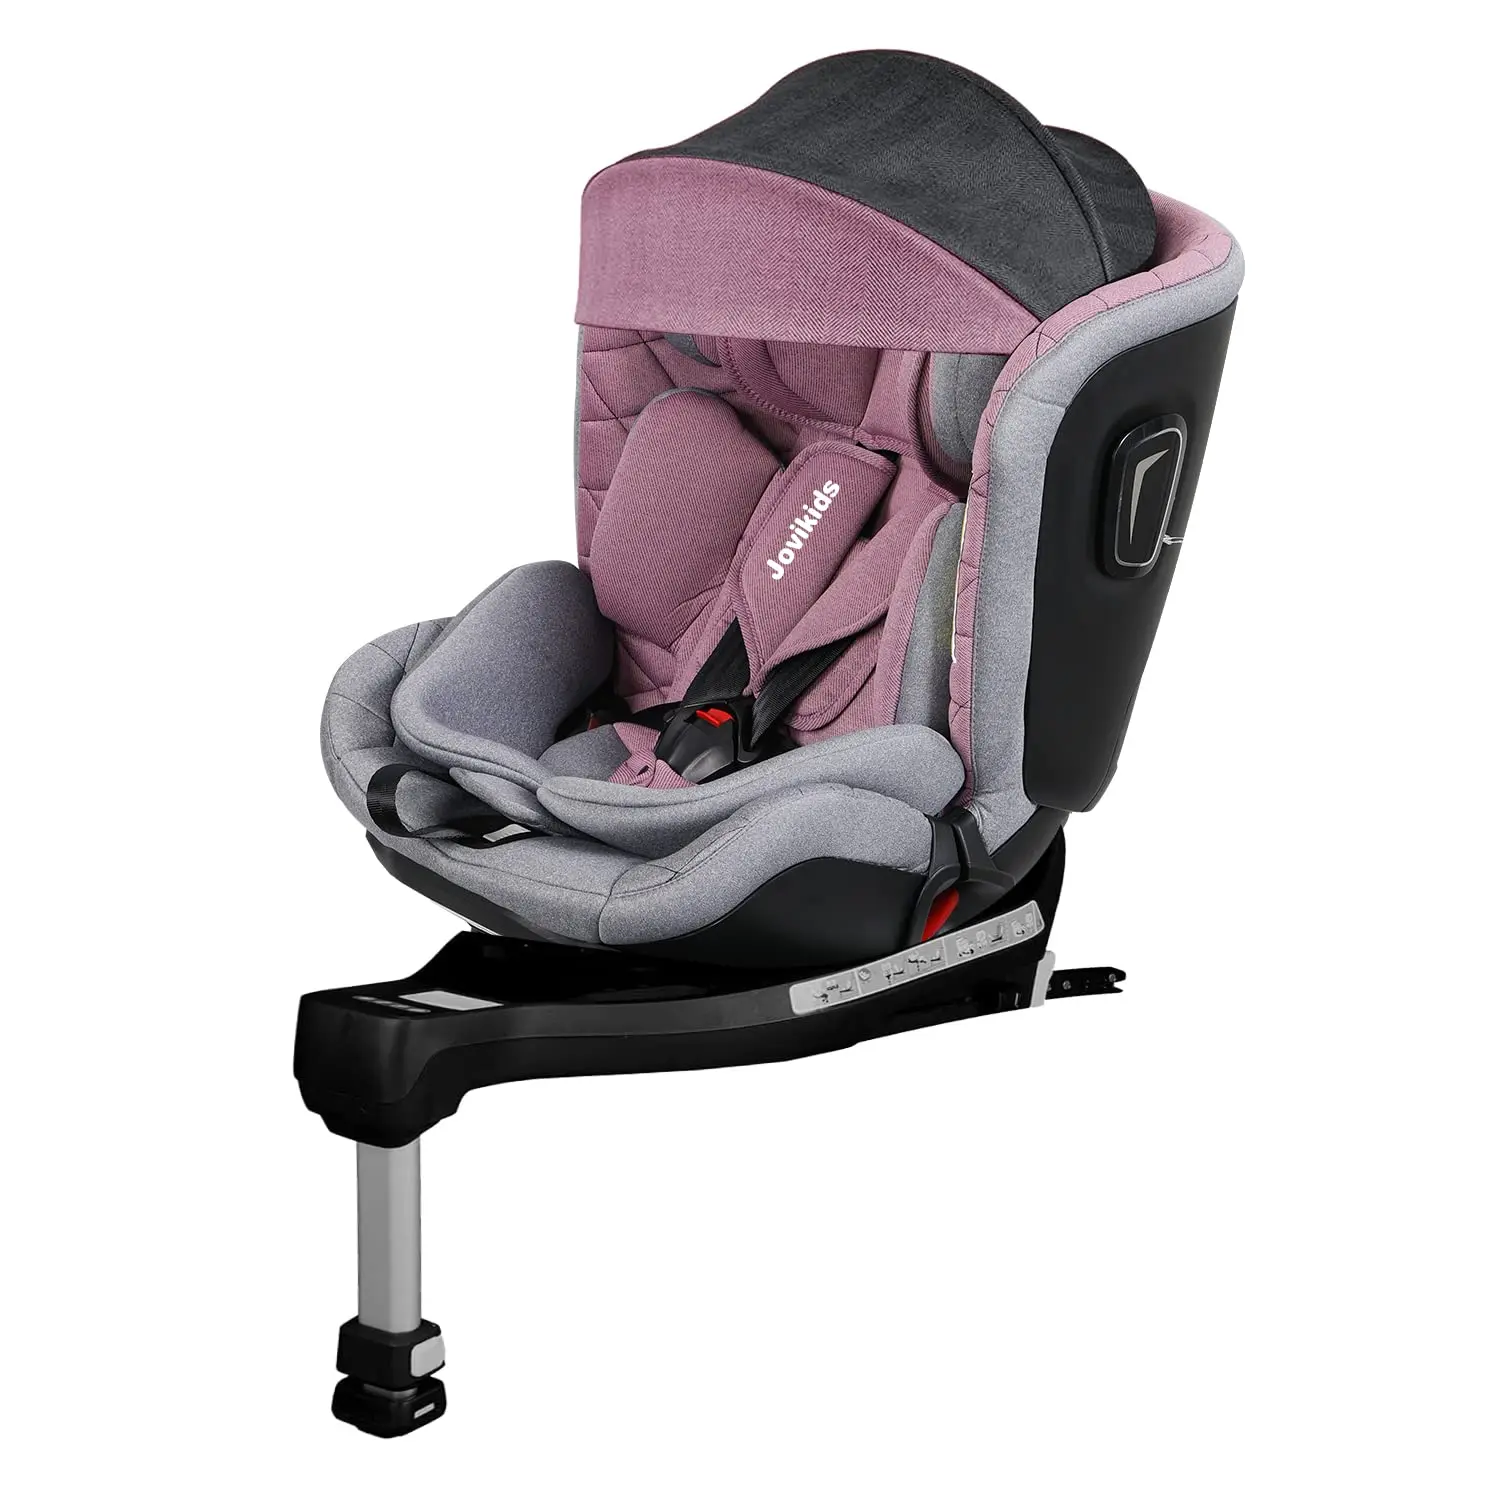 Jovikids ISOFIX Car Seat 360 Swivel with Support Leg and Side Protection for Group 0/1/2/3 Rearward and Forward Facing